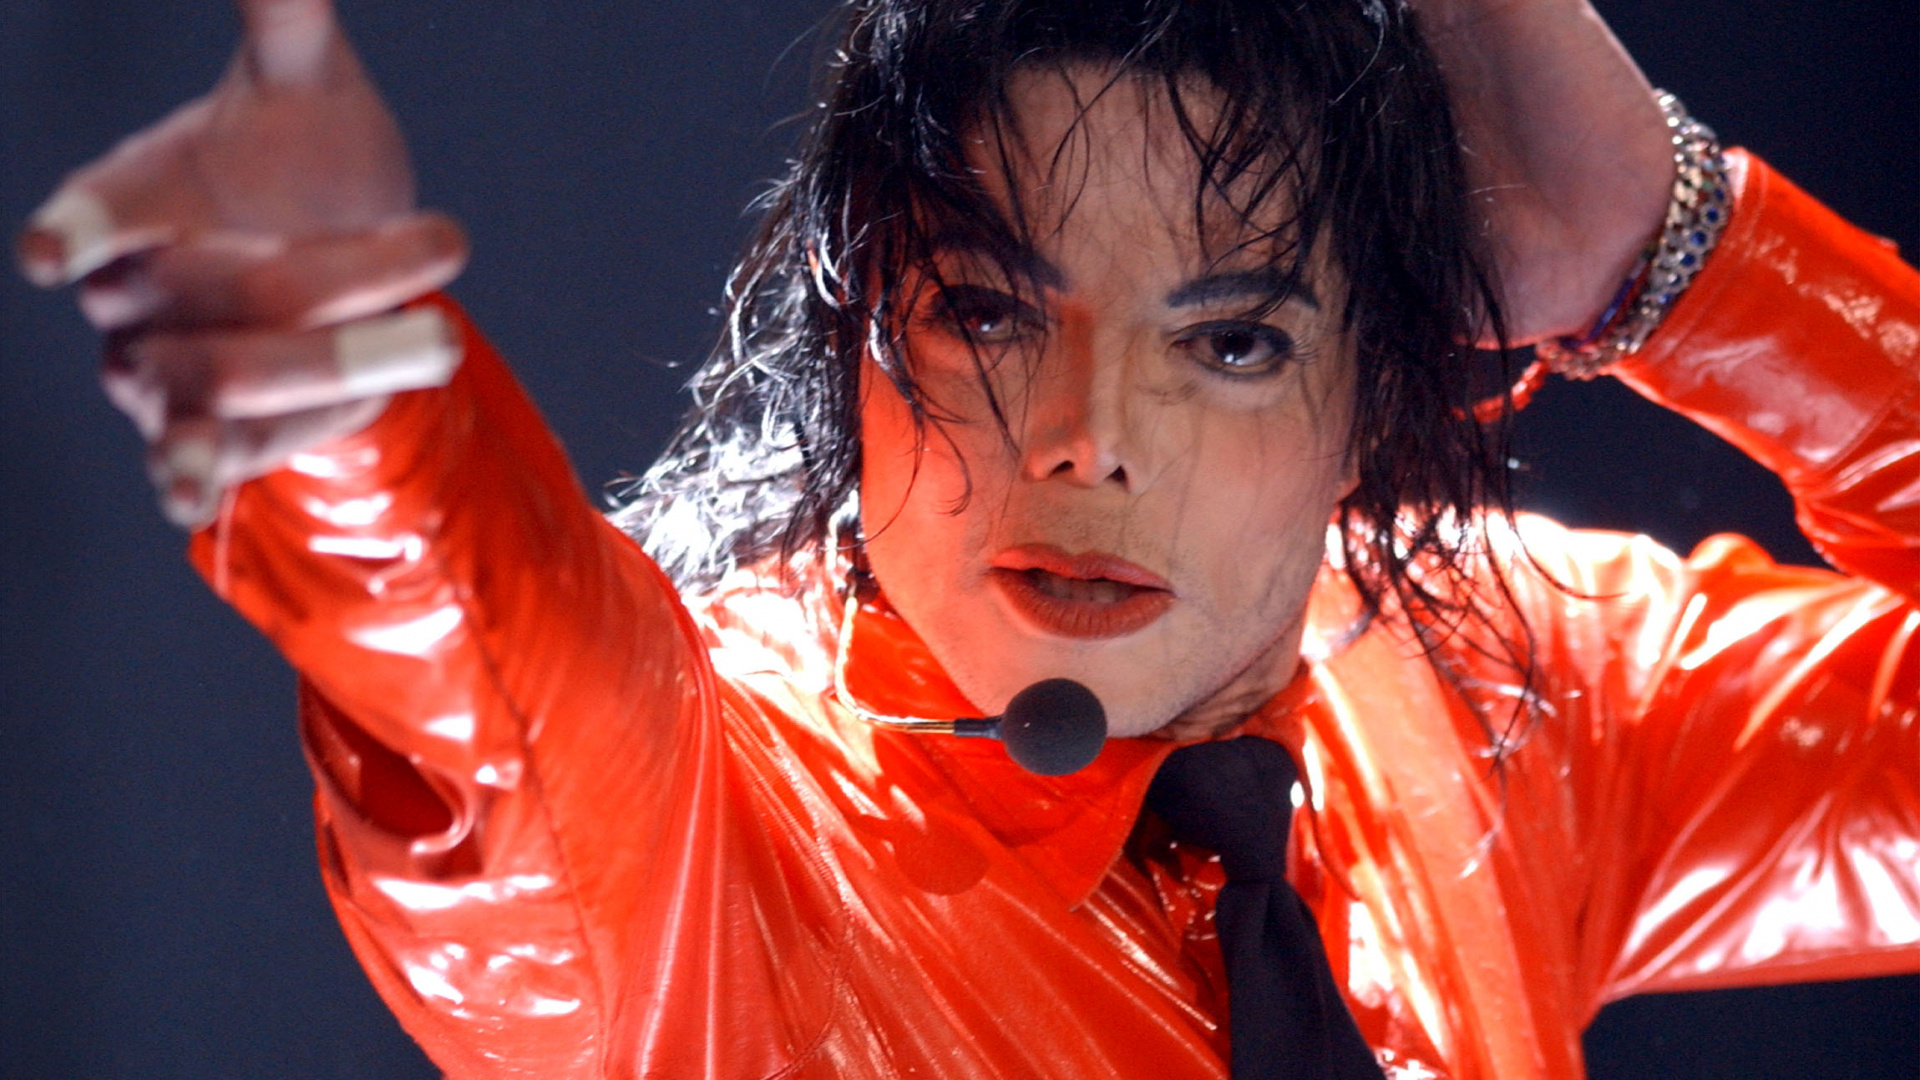 Michael Jackson, Performance, Red, Performing Arts, Singer. Wallpaper in 1920x1080 Resolution